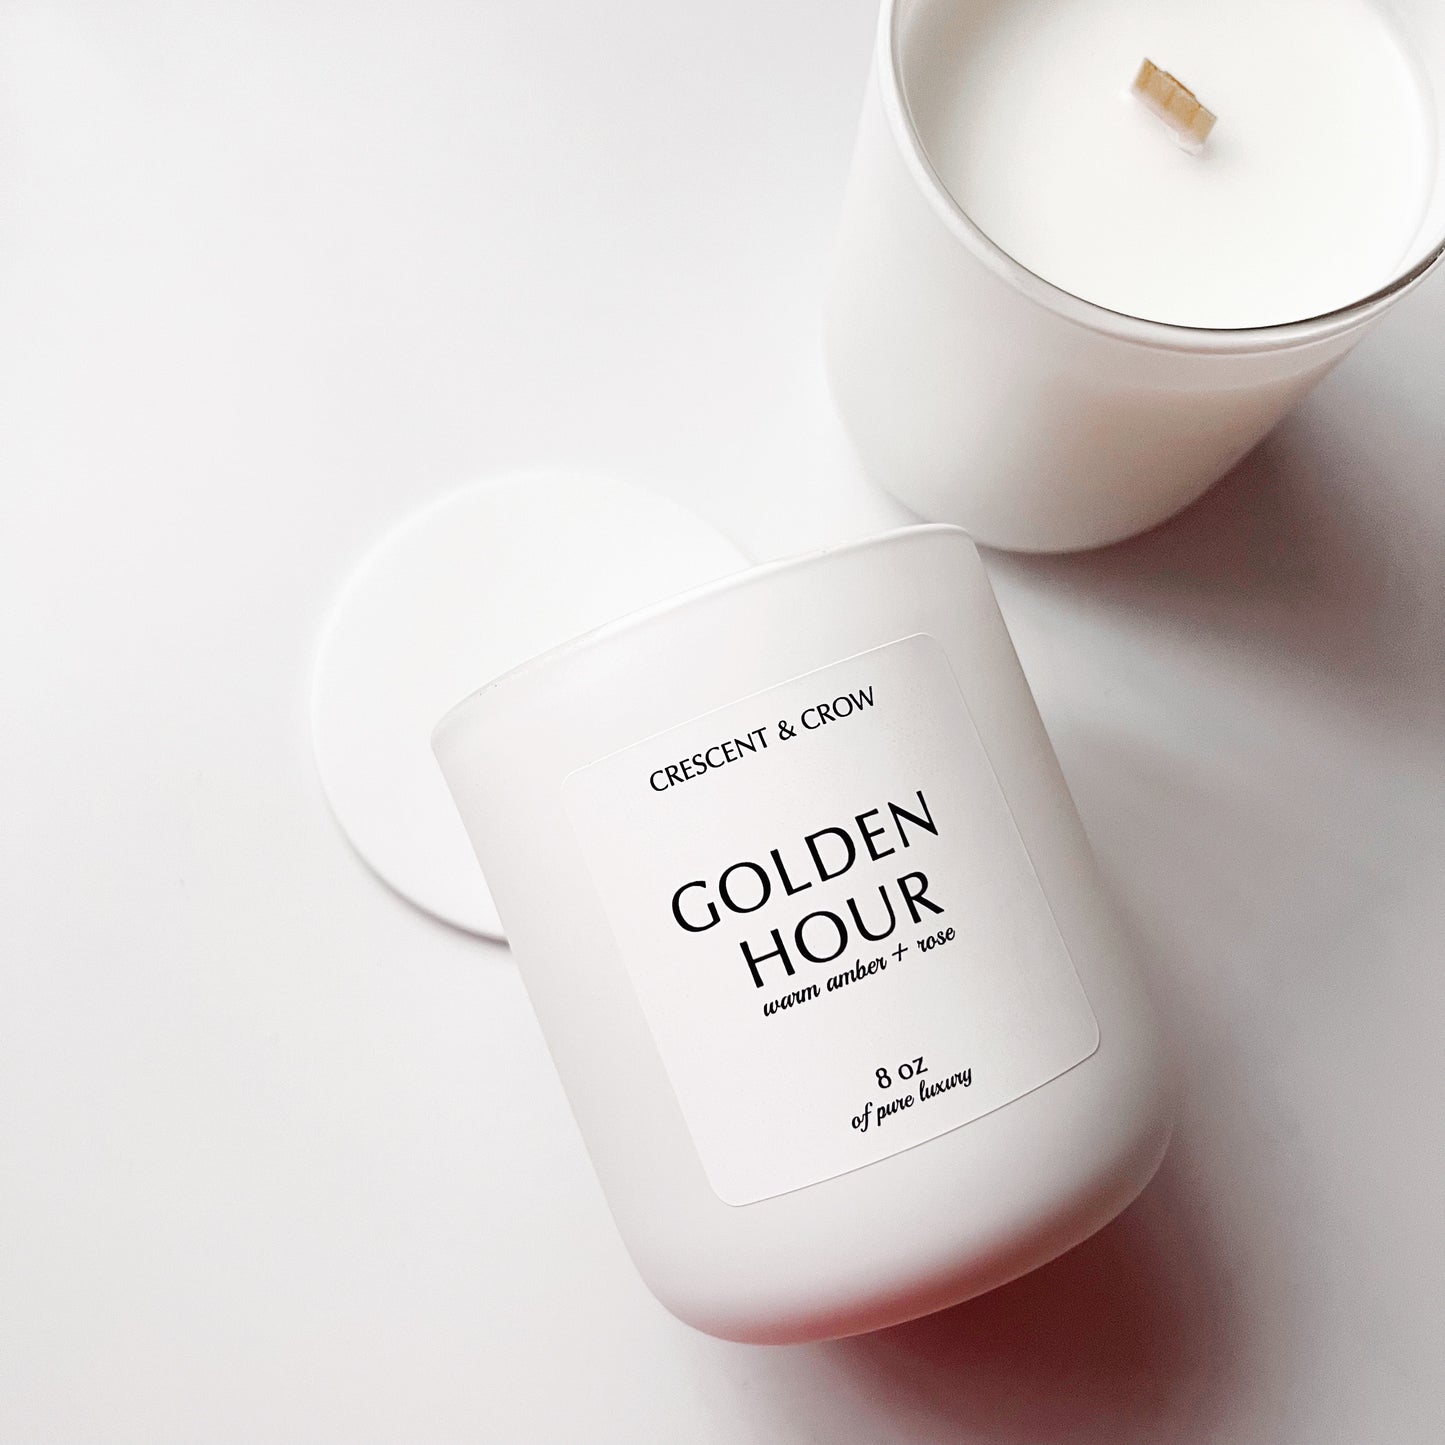 Golden Hour Luxury Candle in Warm Amber + Rose